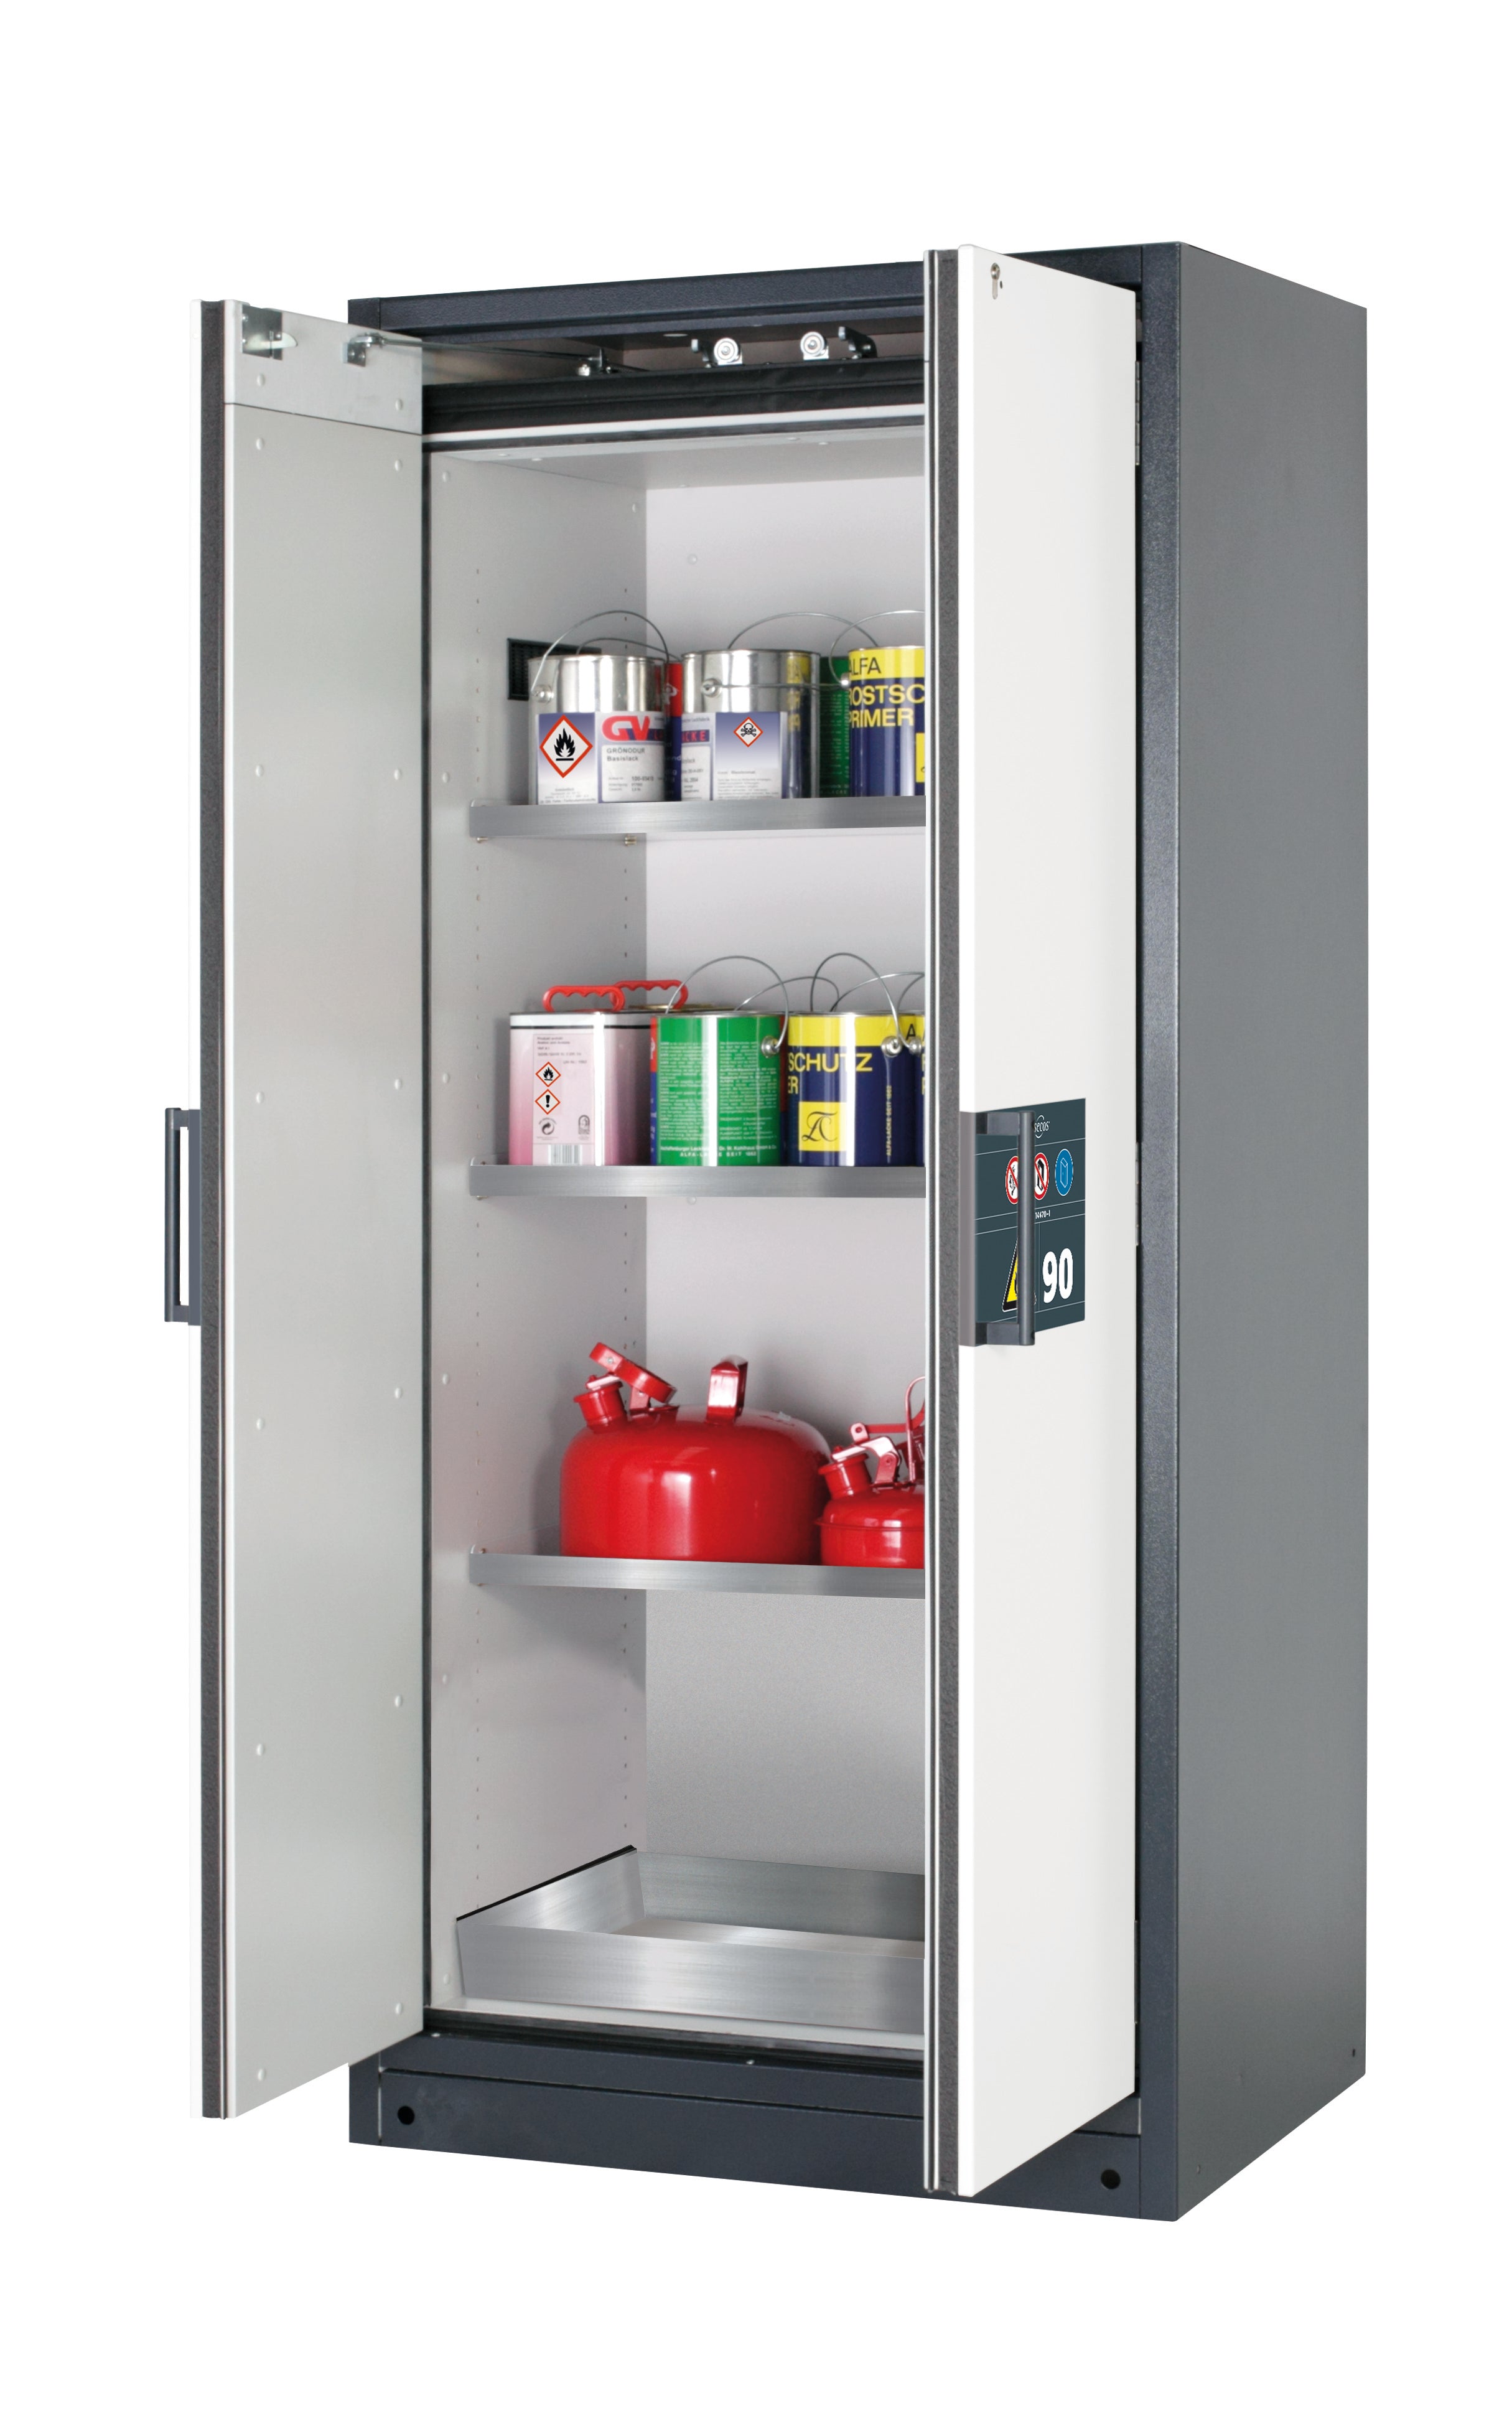 Type 90 safety storage cabinet Q-CLASSIC-90 model Q90.195.090 in pure white RAL 9010 with 3x shelf standard (stainless steel 1.4301),